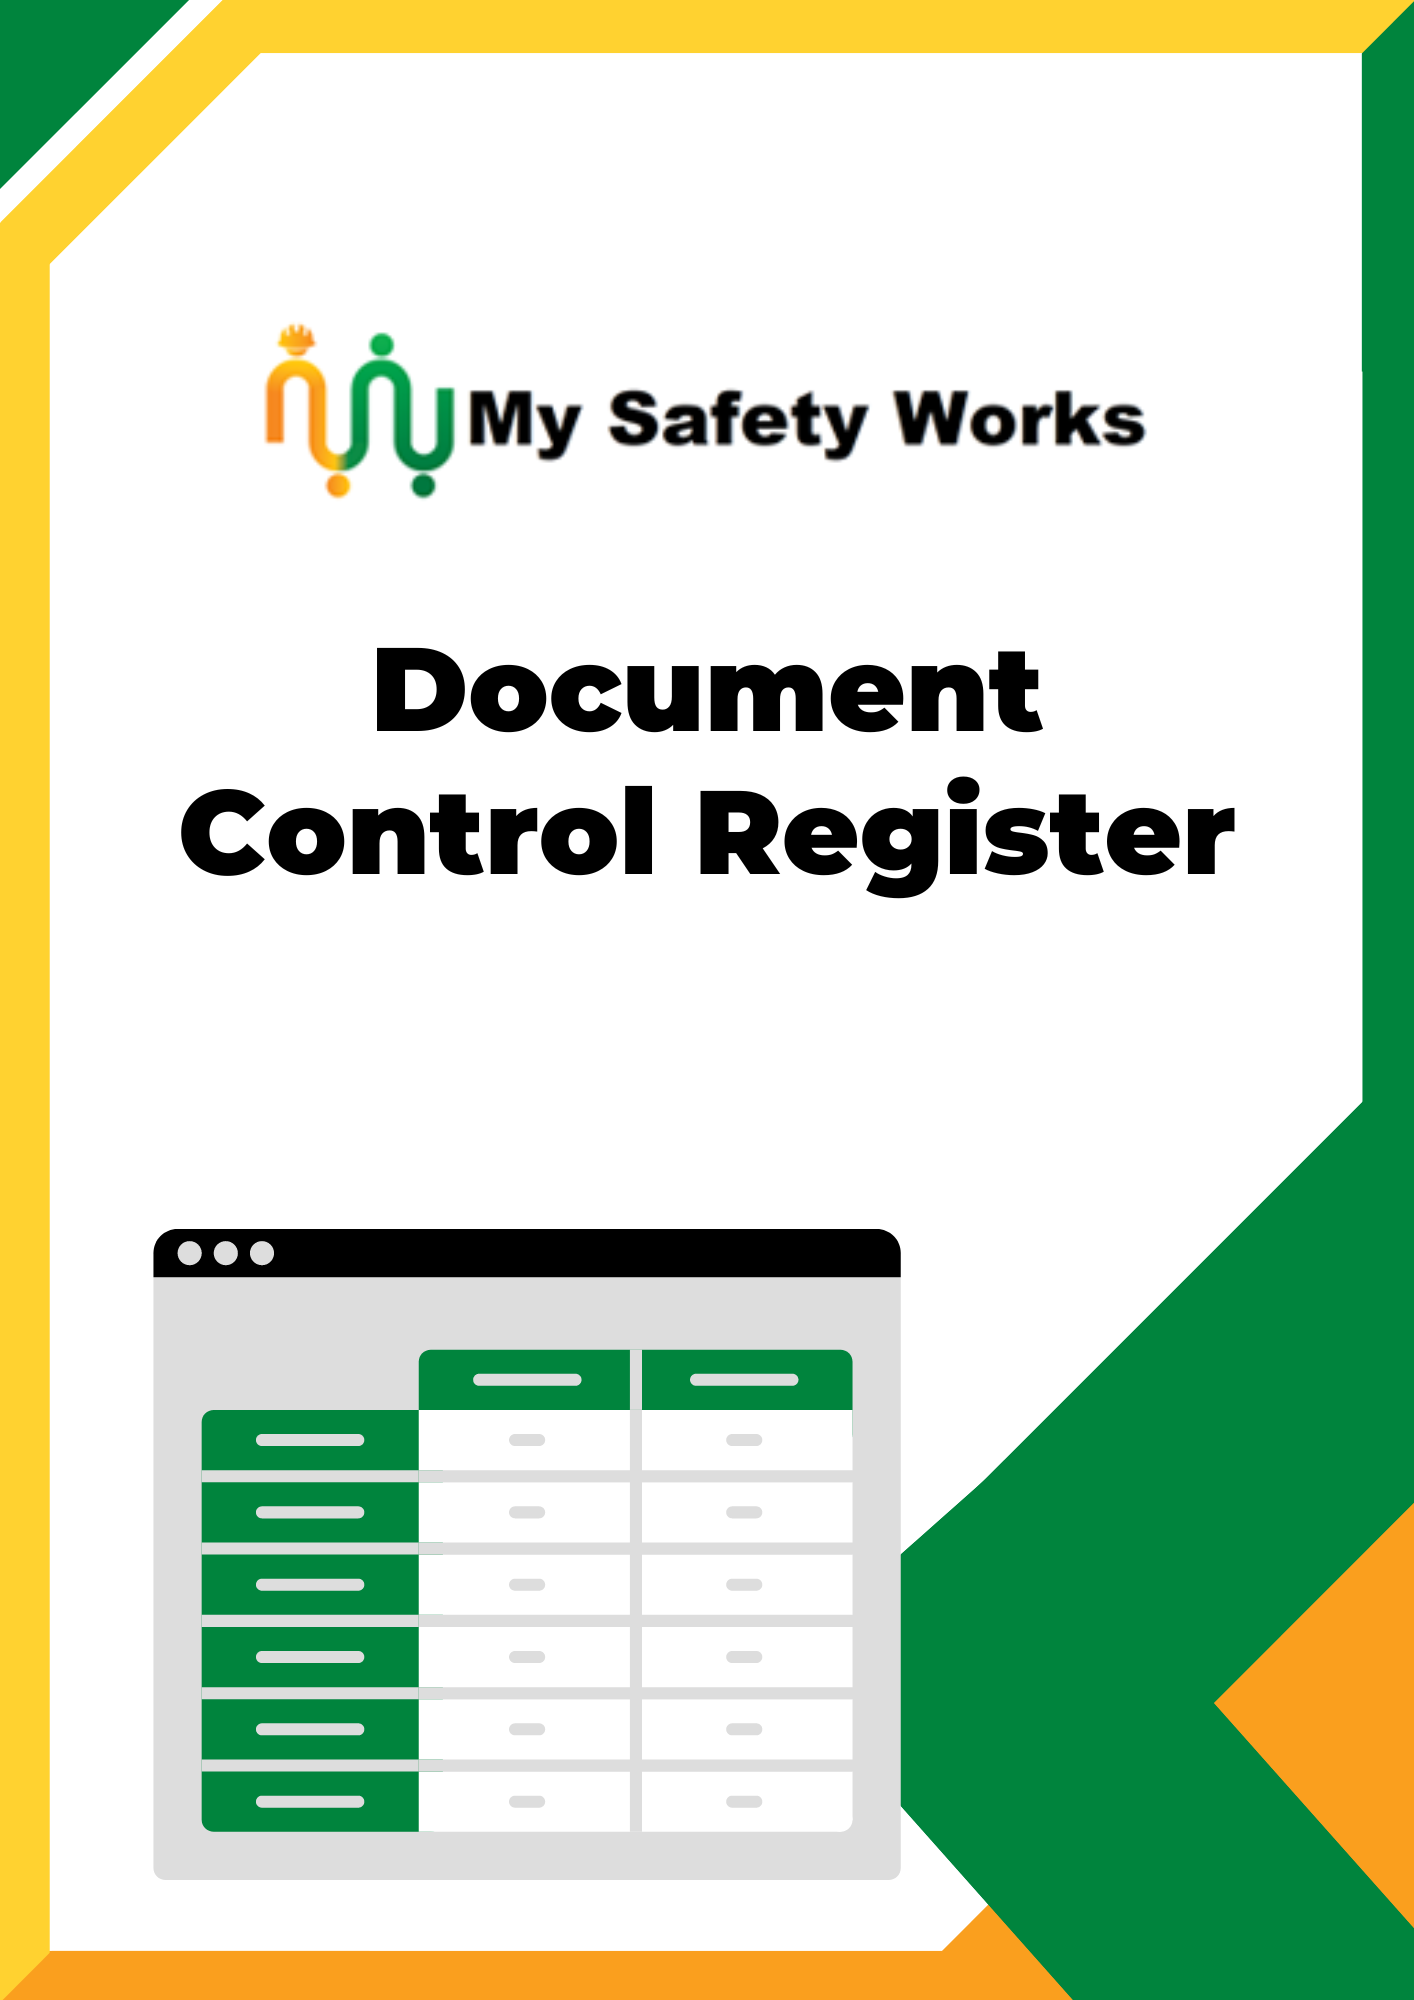 document-control-register-my-safety-works